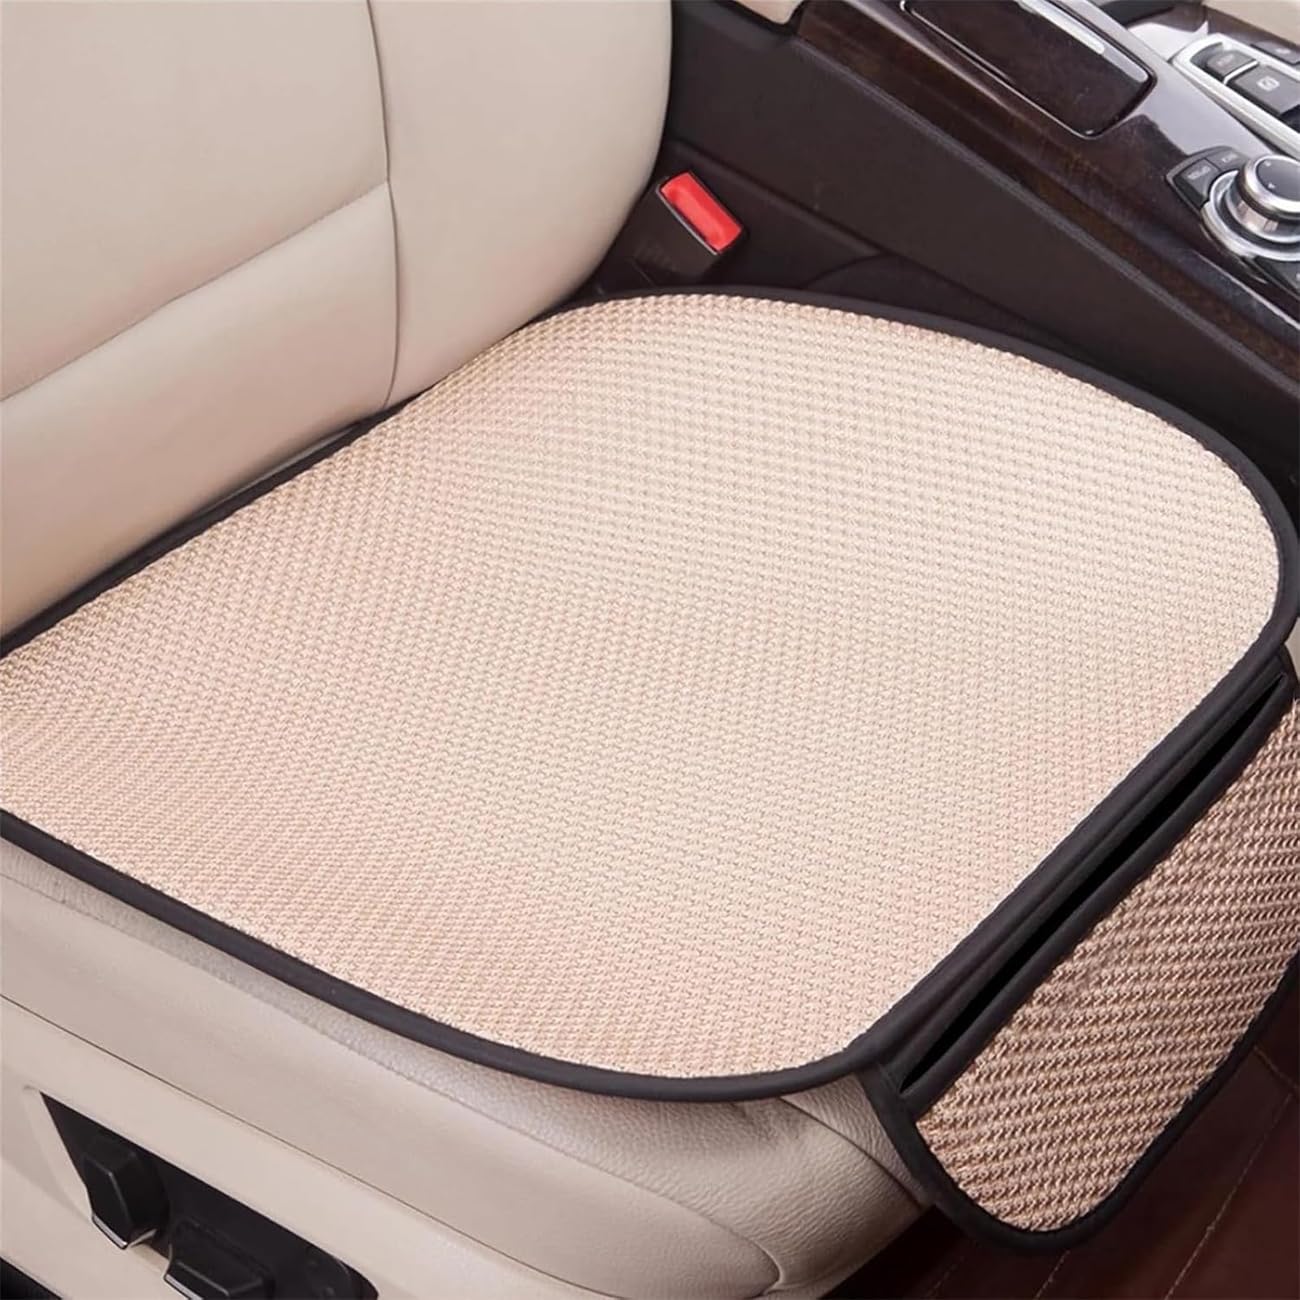 Vinxan Breathable & Anti-Slip Cotton Car Seat Covers,Ice Silk Non-slip Car Seat Pad for Summer Breathable and Refreshing,Ice Pack for Car Seat,Cooling Seat Covers for Cars (Beige, Front*2) von Vinxan